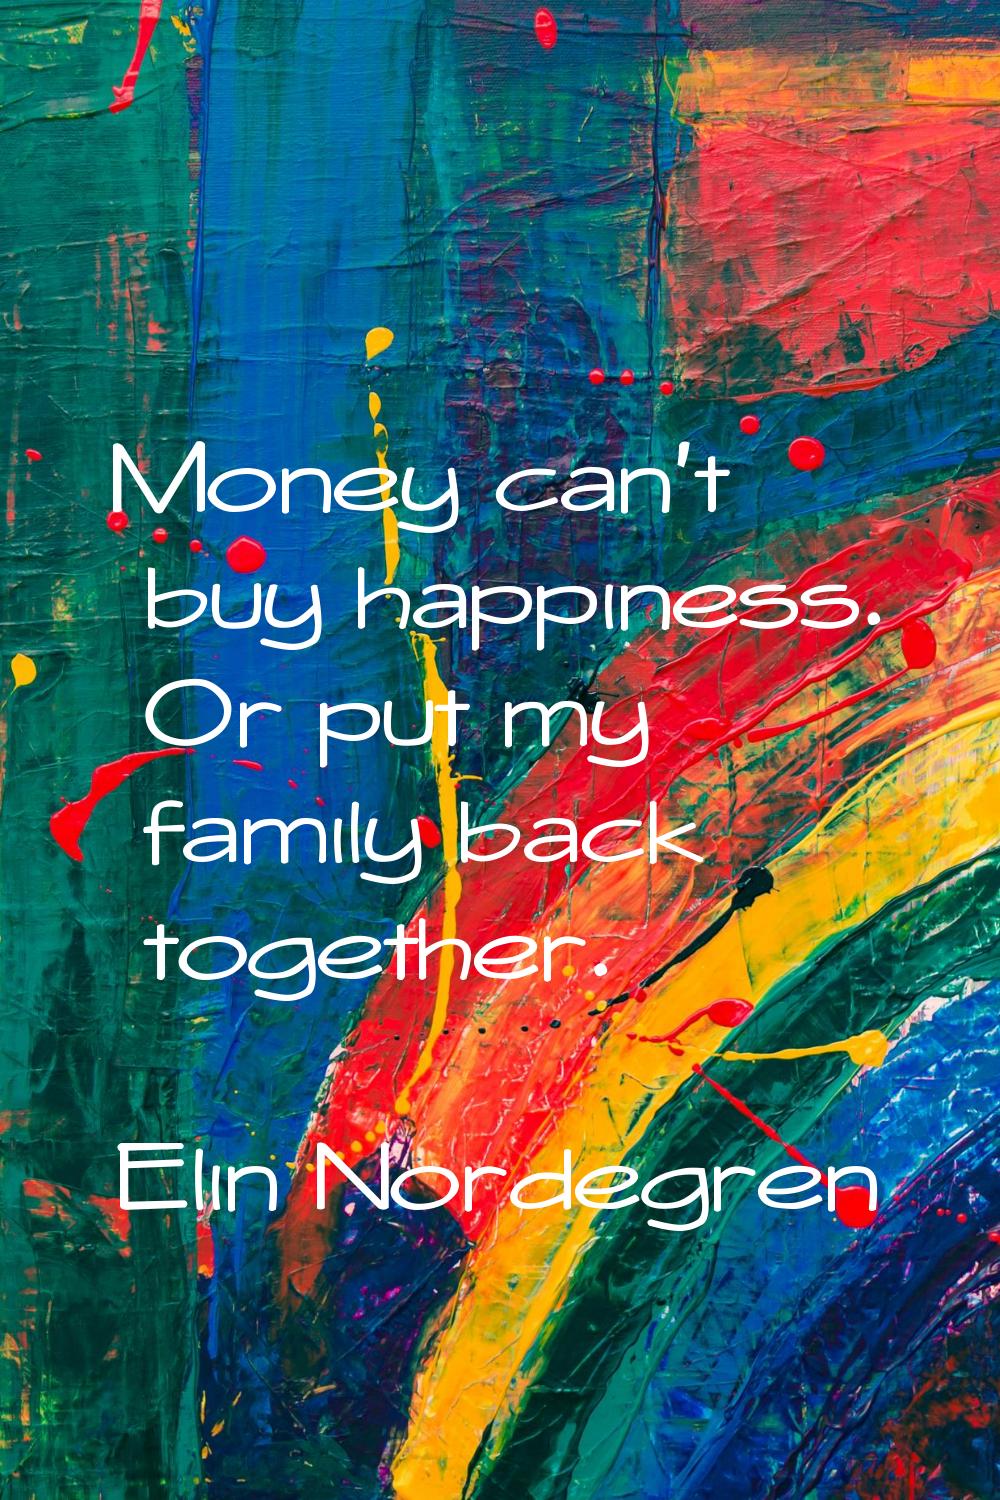 Money can't buy happiness. Or put my family back together.